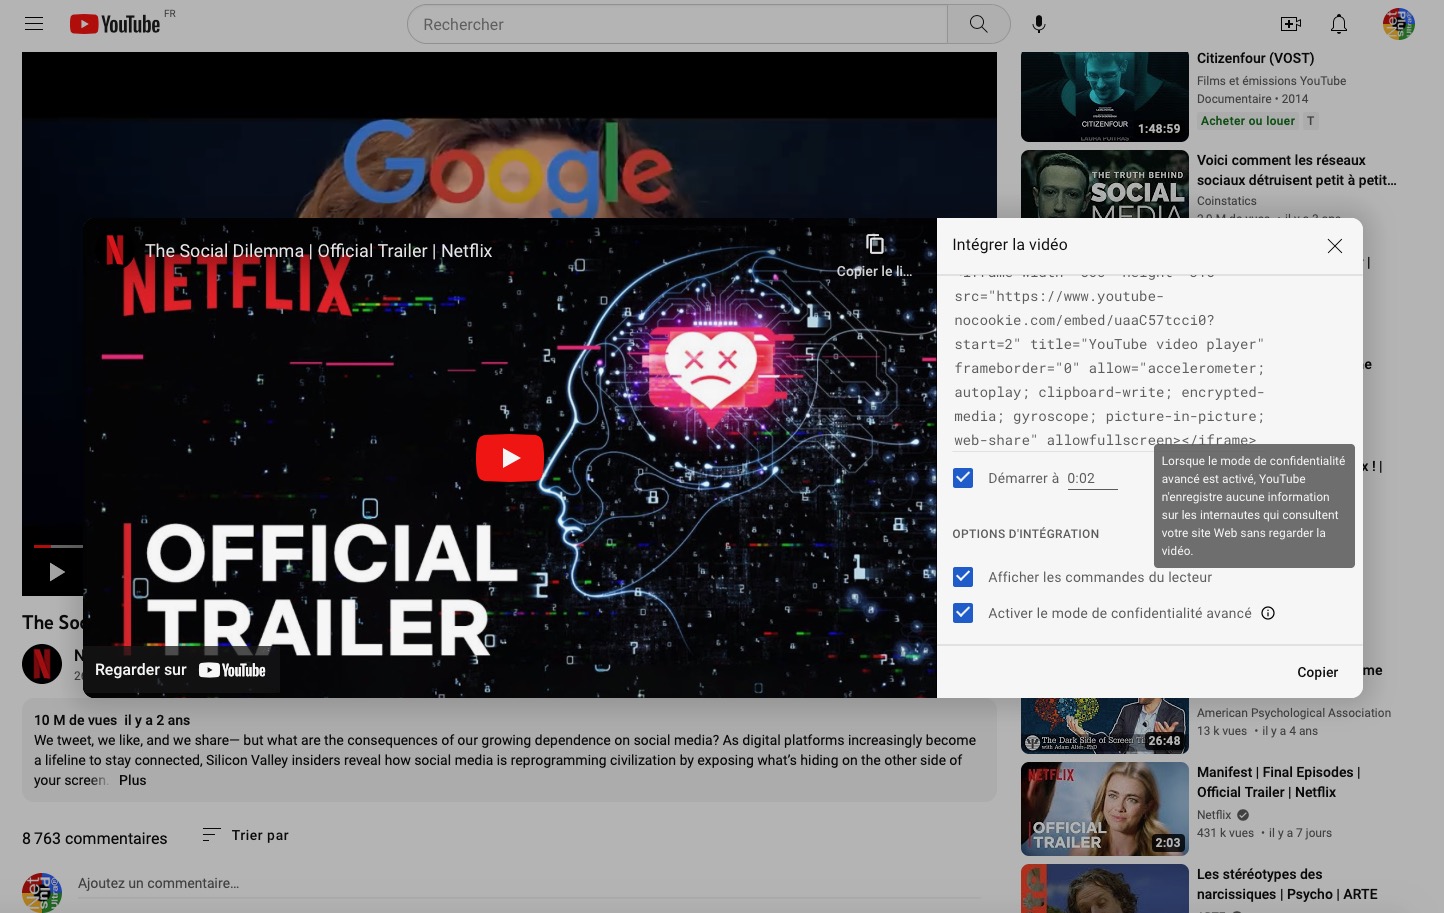  Embed code features of a film trailer hosted at YouTube (screen capture by Daniela BERNDT). 